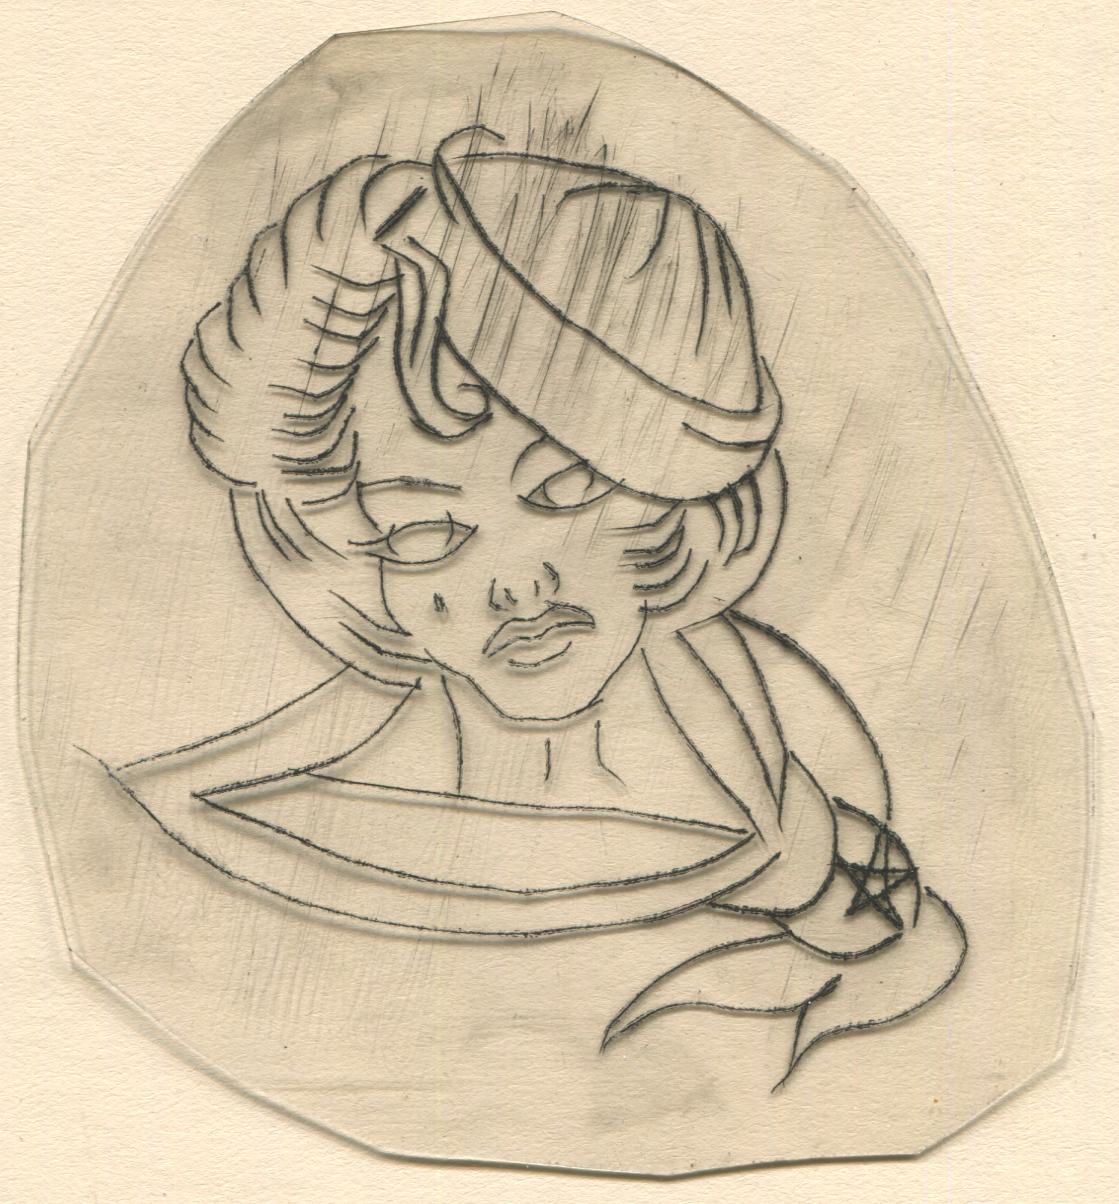 Sailor Woman Vintage Traditional Tattoo Acetate Stencil from Bert Grimm's Shop